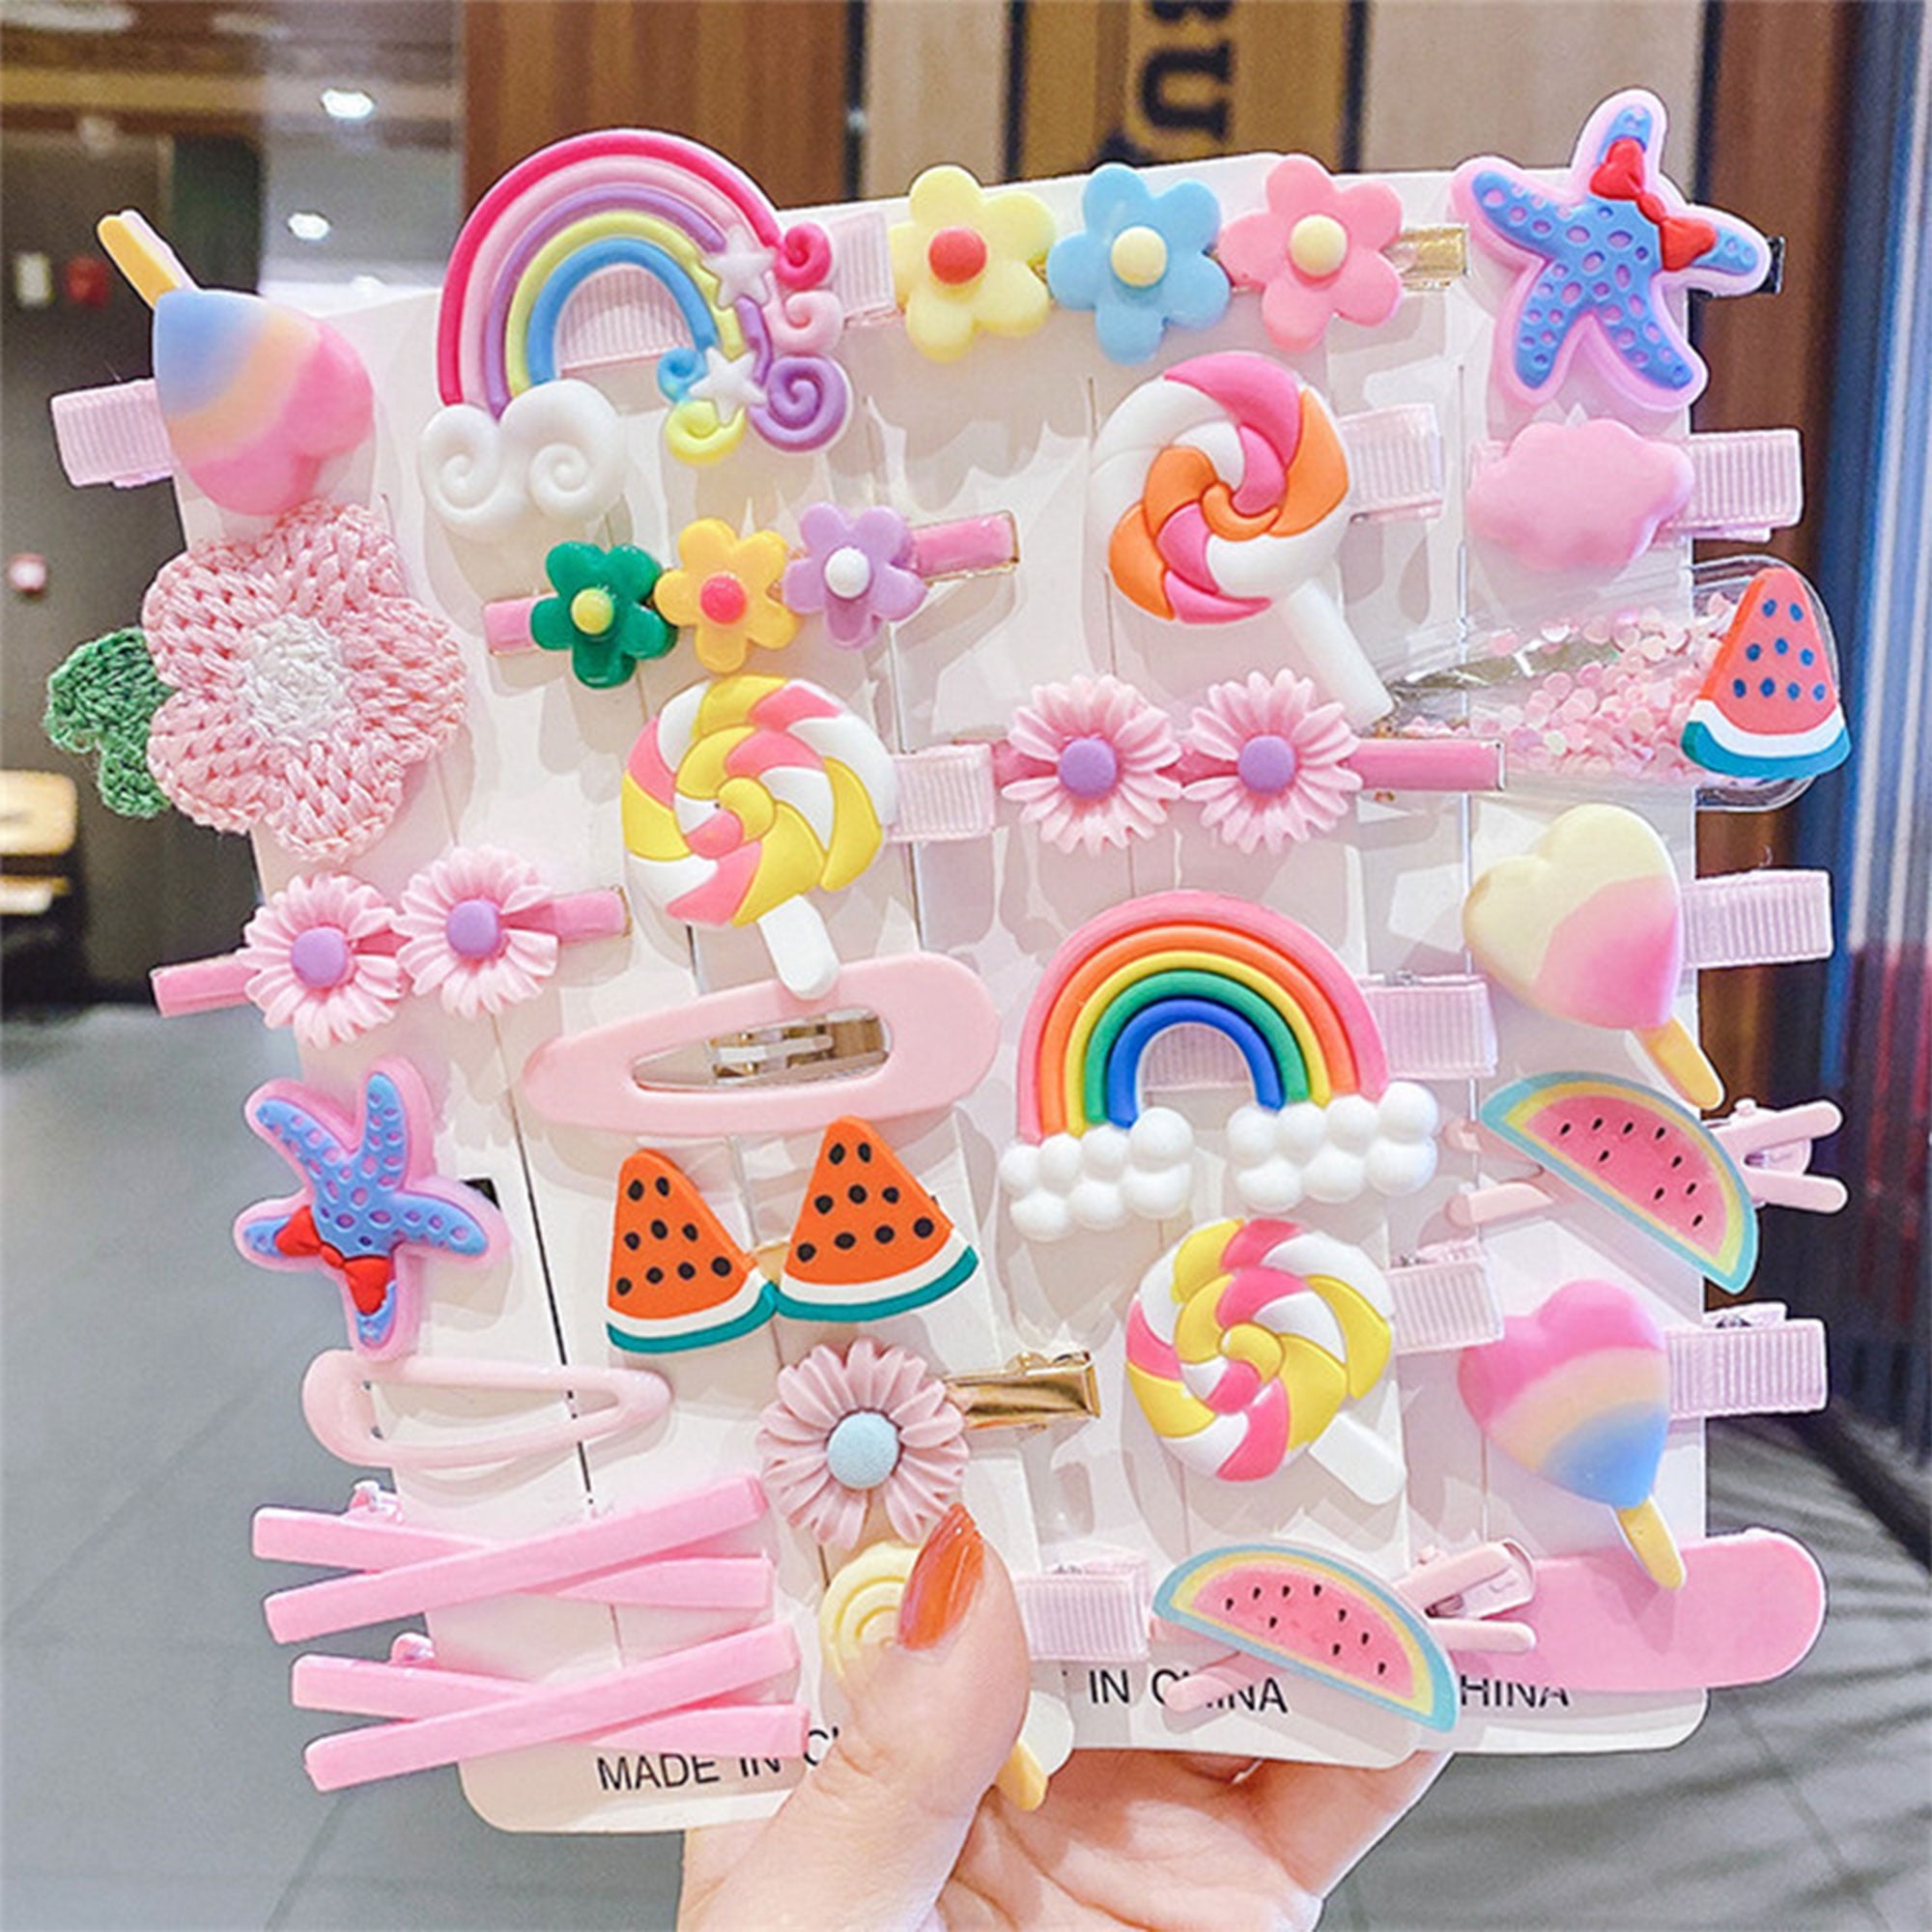 Kawaii Princess Fruit Hairpins For Kids And Women Stylish Kawaii Hair Clips  For Haircuts And Headdresses From Mkny, $1.81